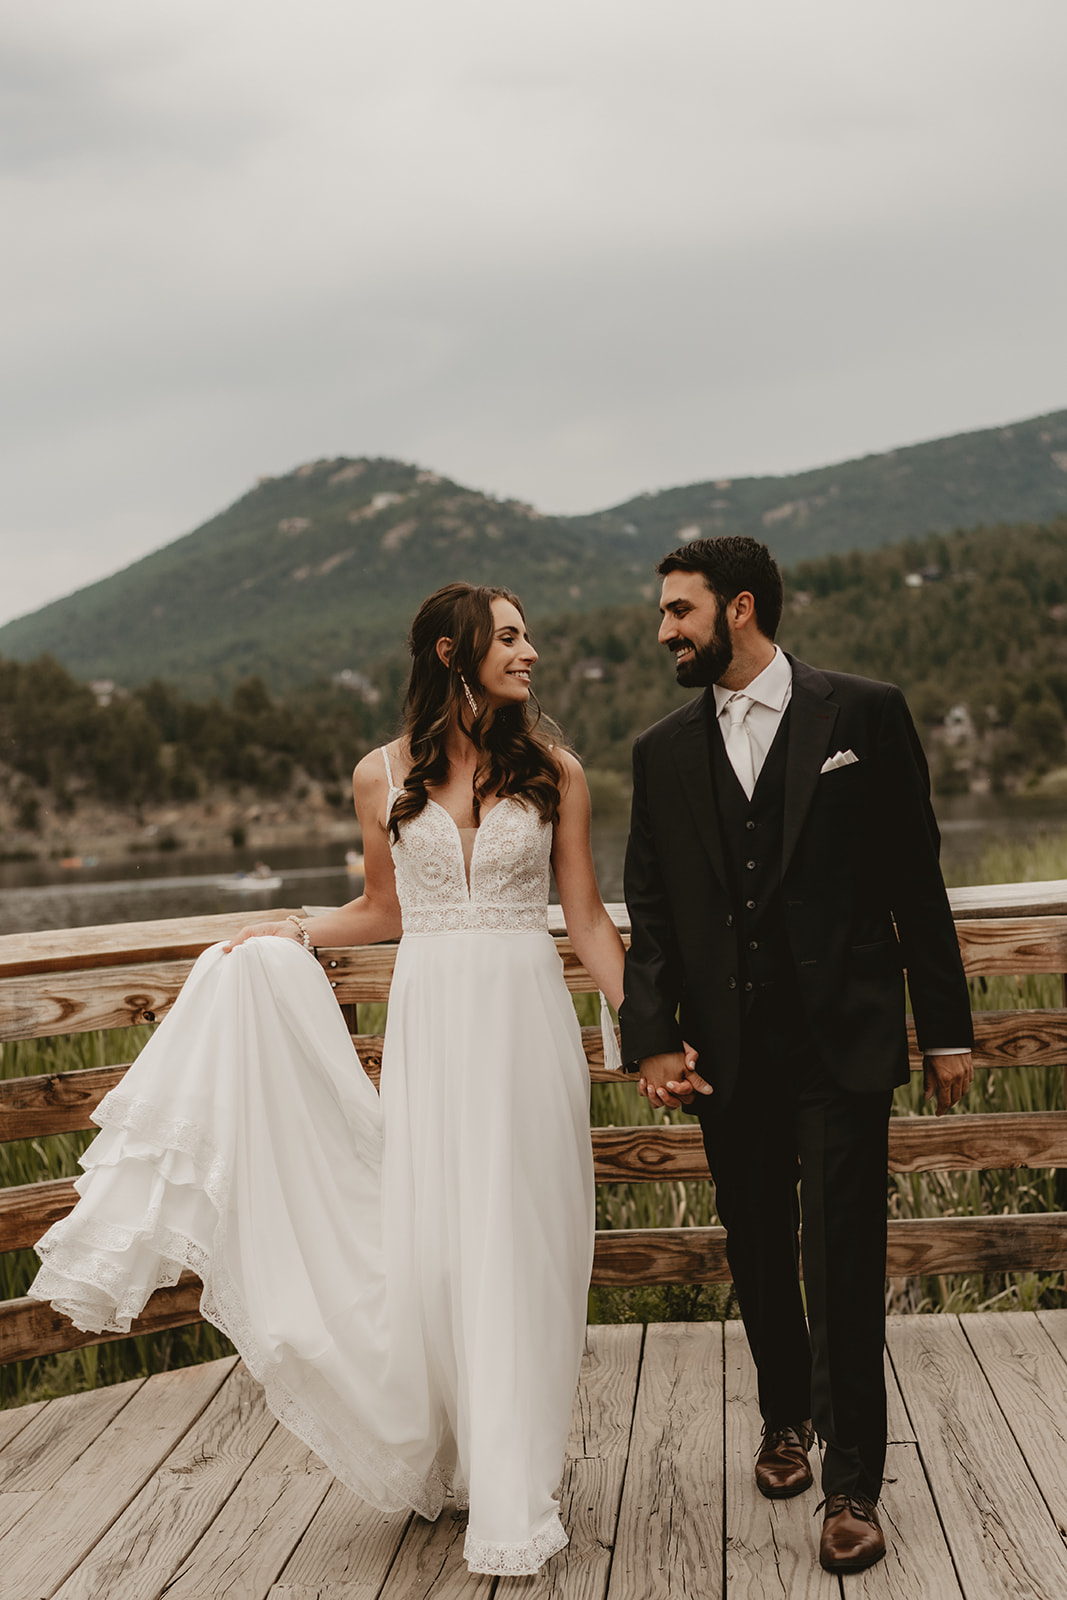 The Evergreen Lake House Wedding in the Colorado Summer by a lake surrounded by the evergreen trees and mountains